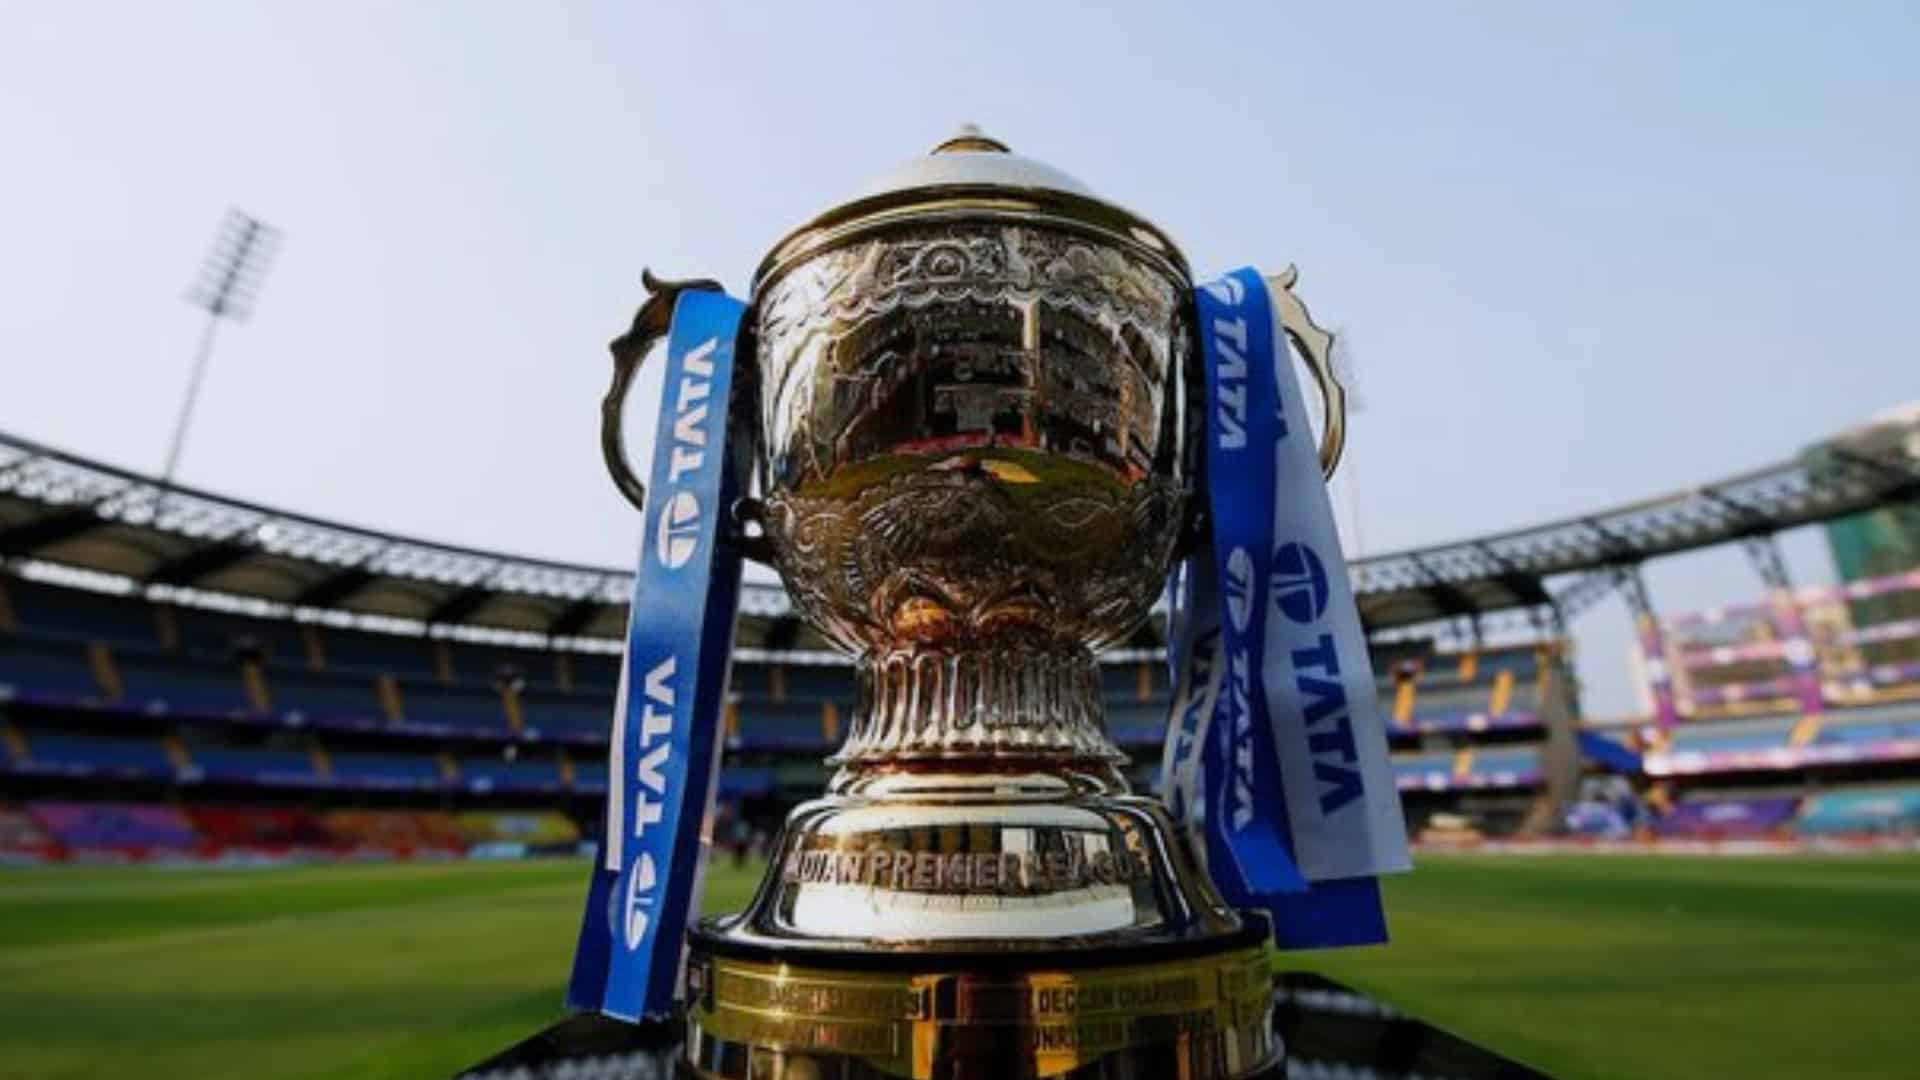 Viacom18 says has become one of the largest sporting destinations in India after bagging IPL digital rights